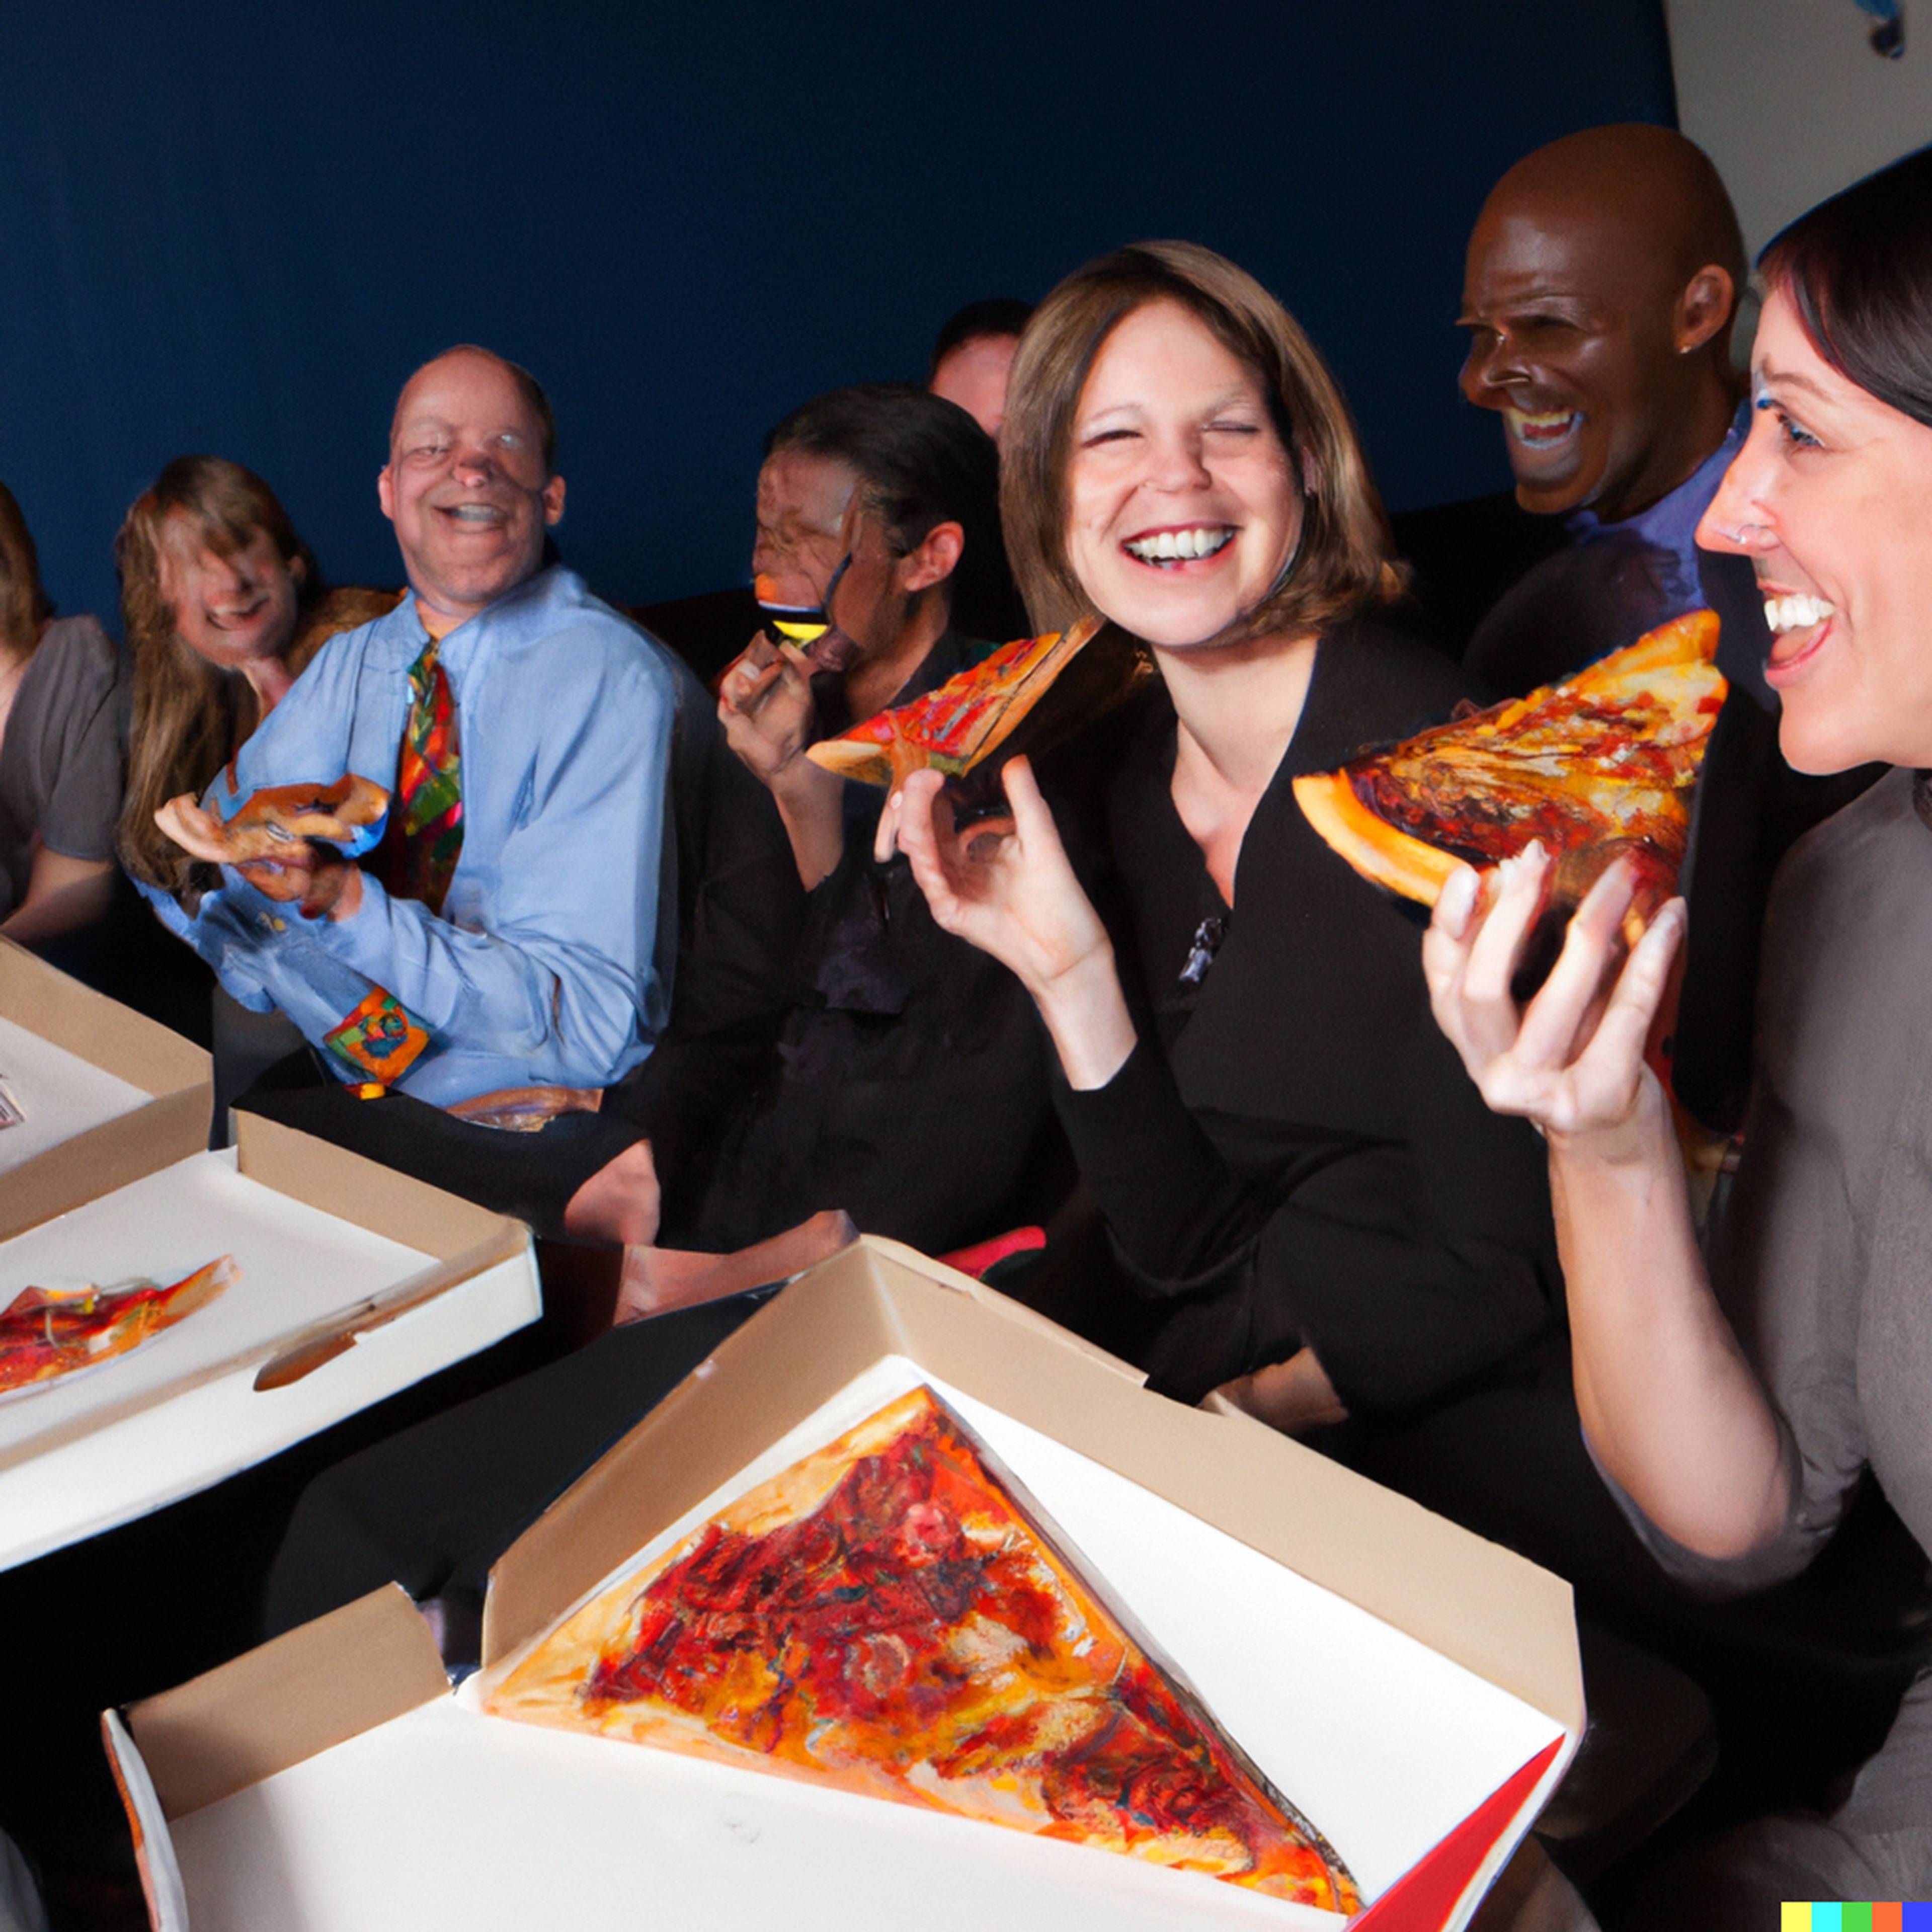 Image gnerated by DALL-E  using the prompt “Enron Corporation employees enjoying a pizza party”